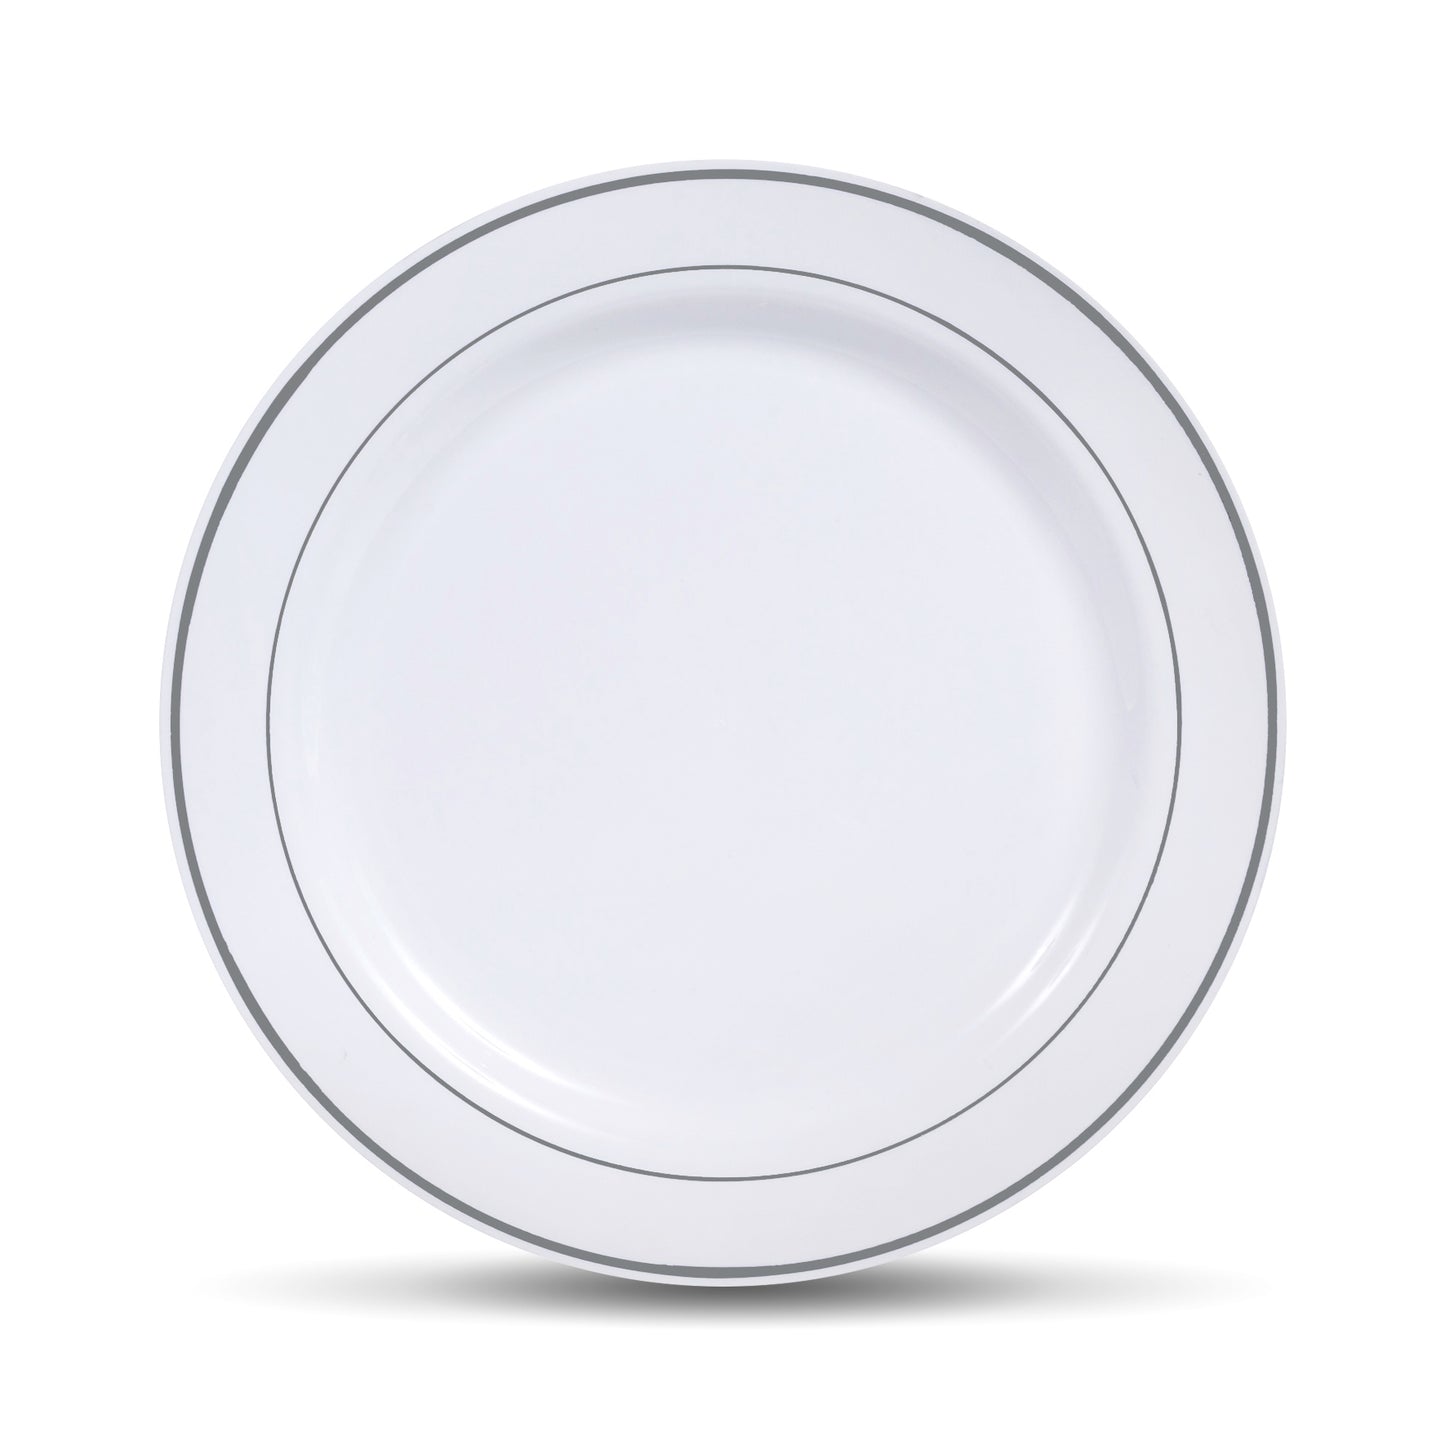 Disposable Plastic Dinner Plates for Parties